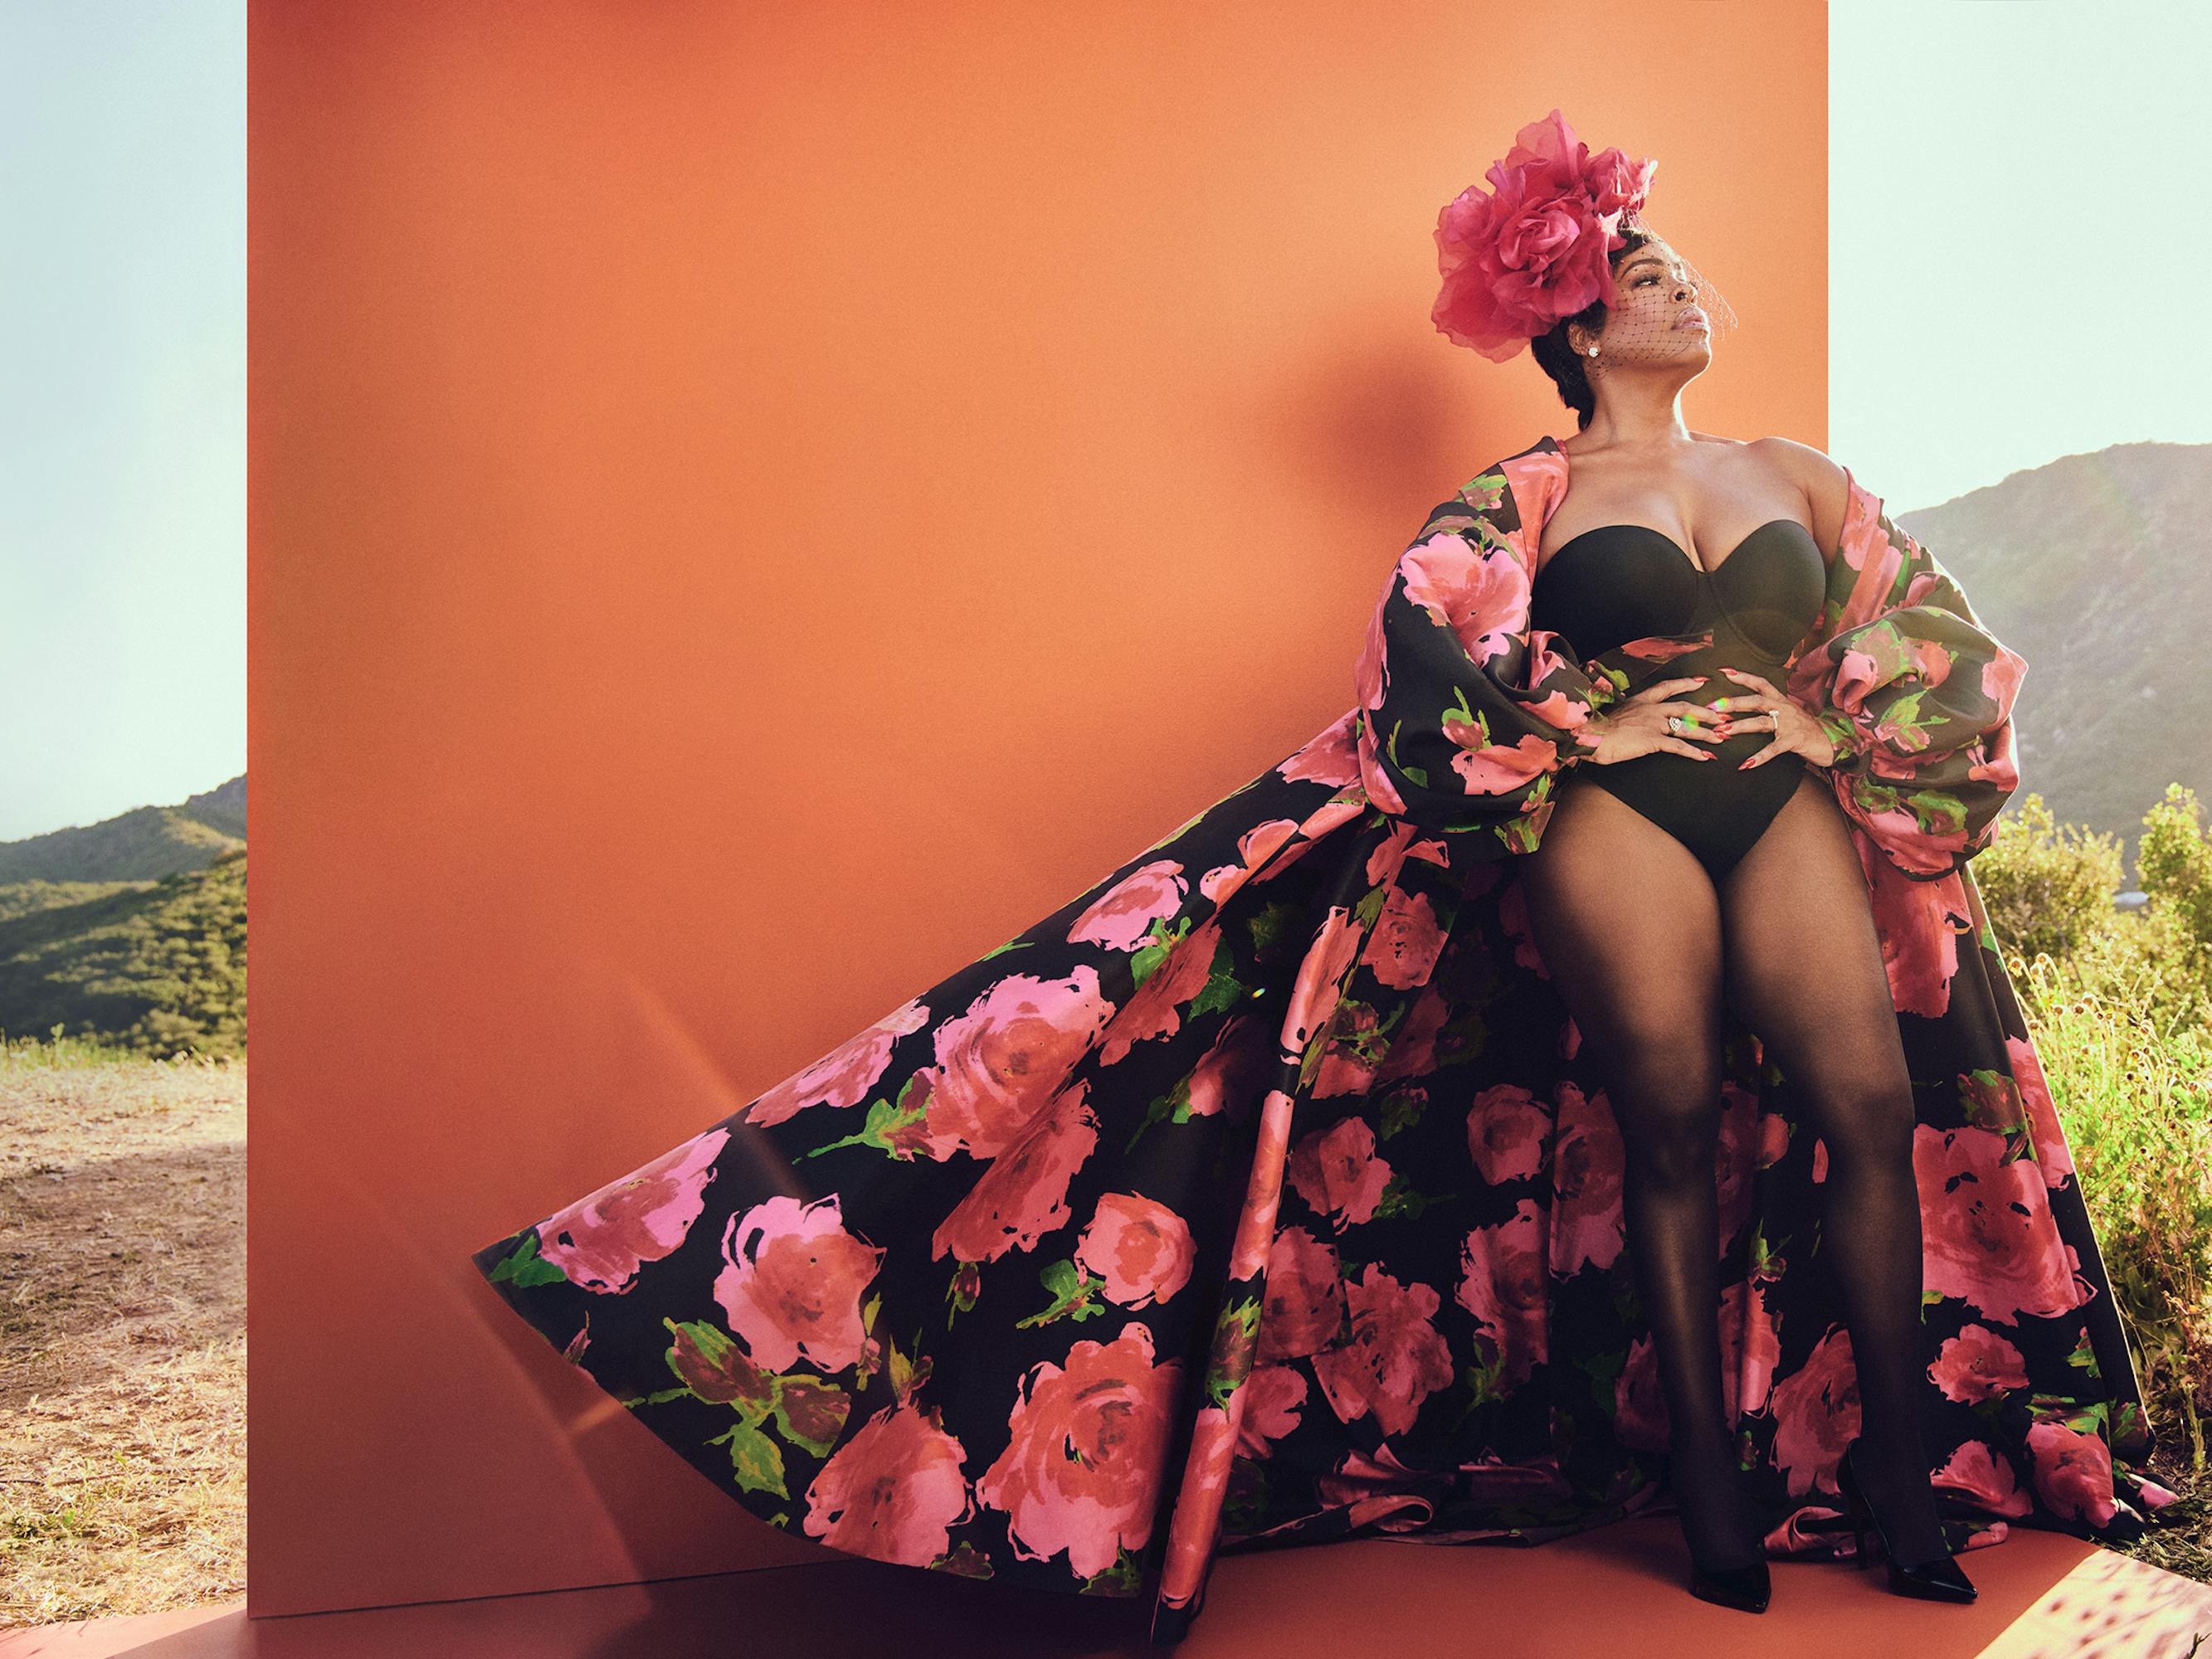 Niecy Nash-Betts strikes a pose against an orange wall. She wears a strapless bodysuit, sheer tights, and a black cape with pink and green flowers on it. Behind the orange wall is a grassy hillside.